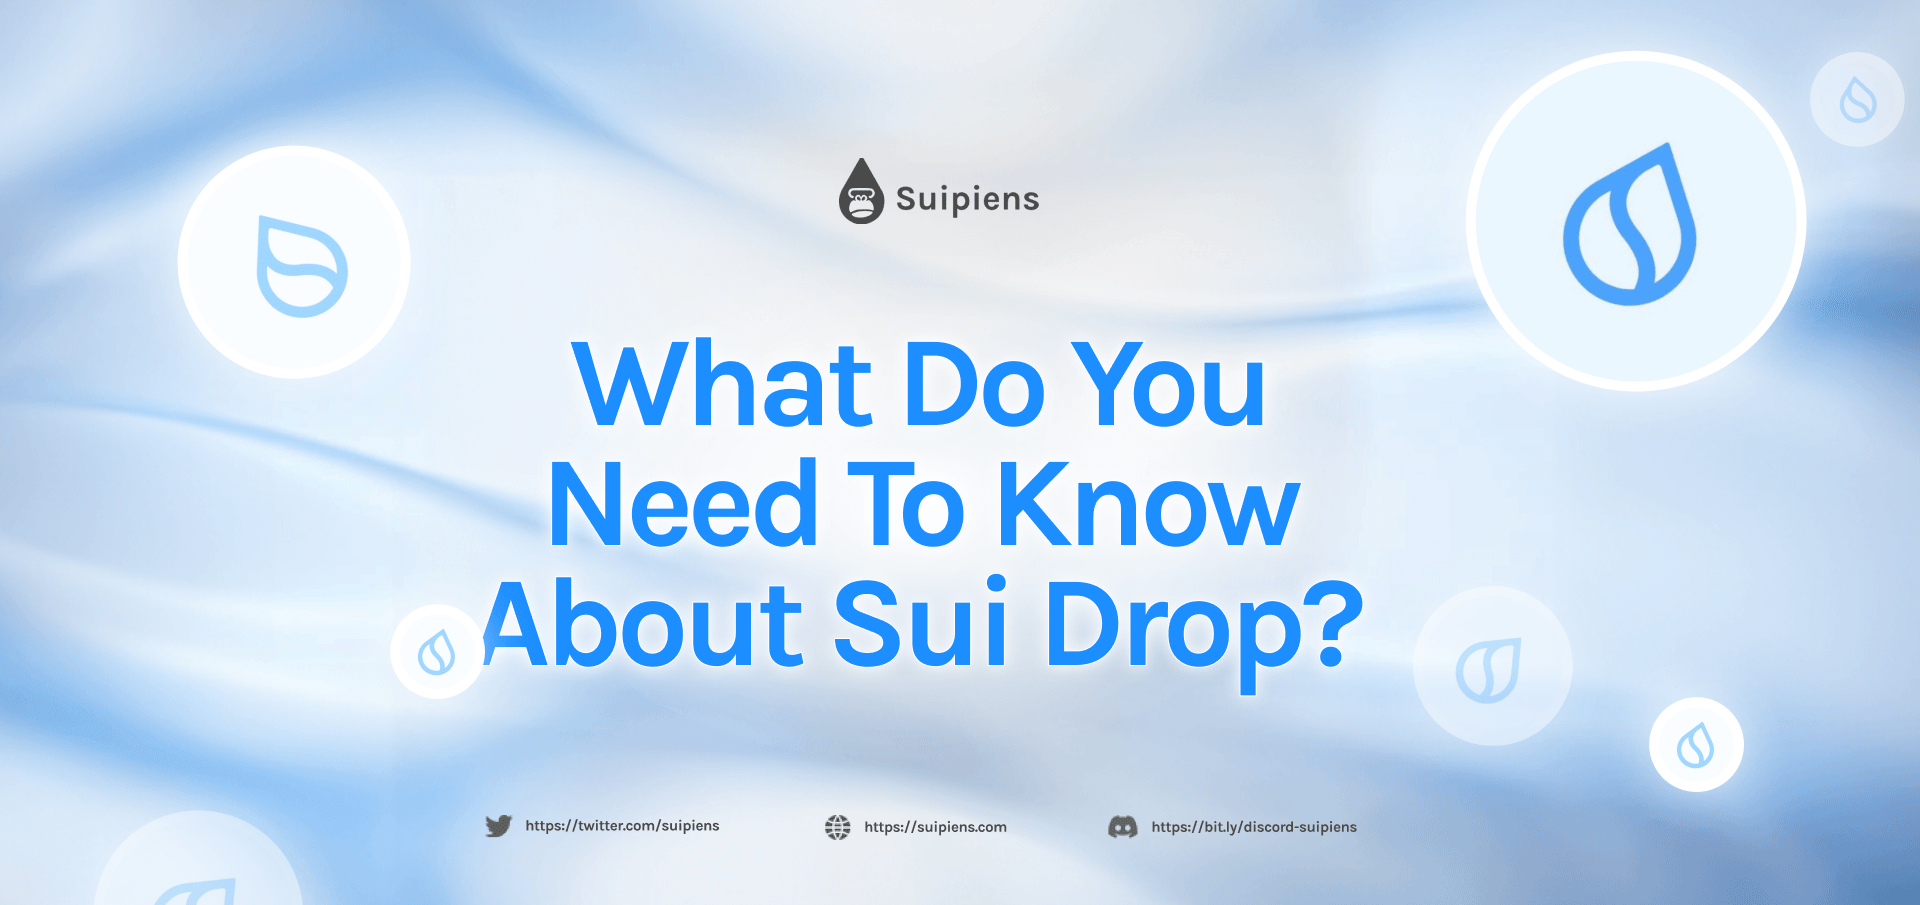 What do you need to know about Sui Drop?